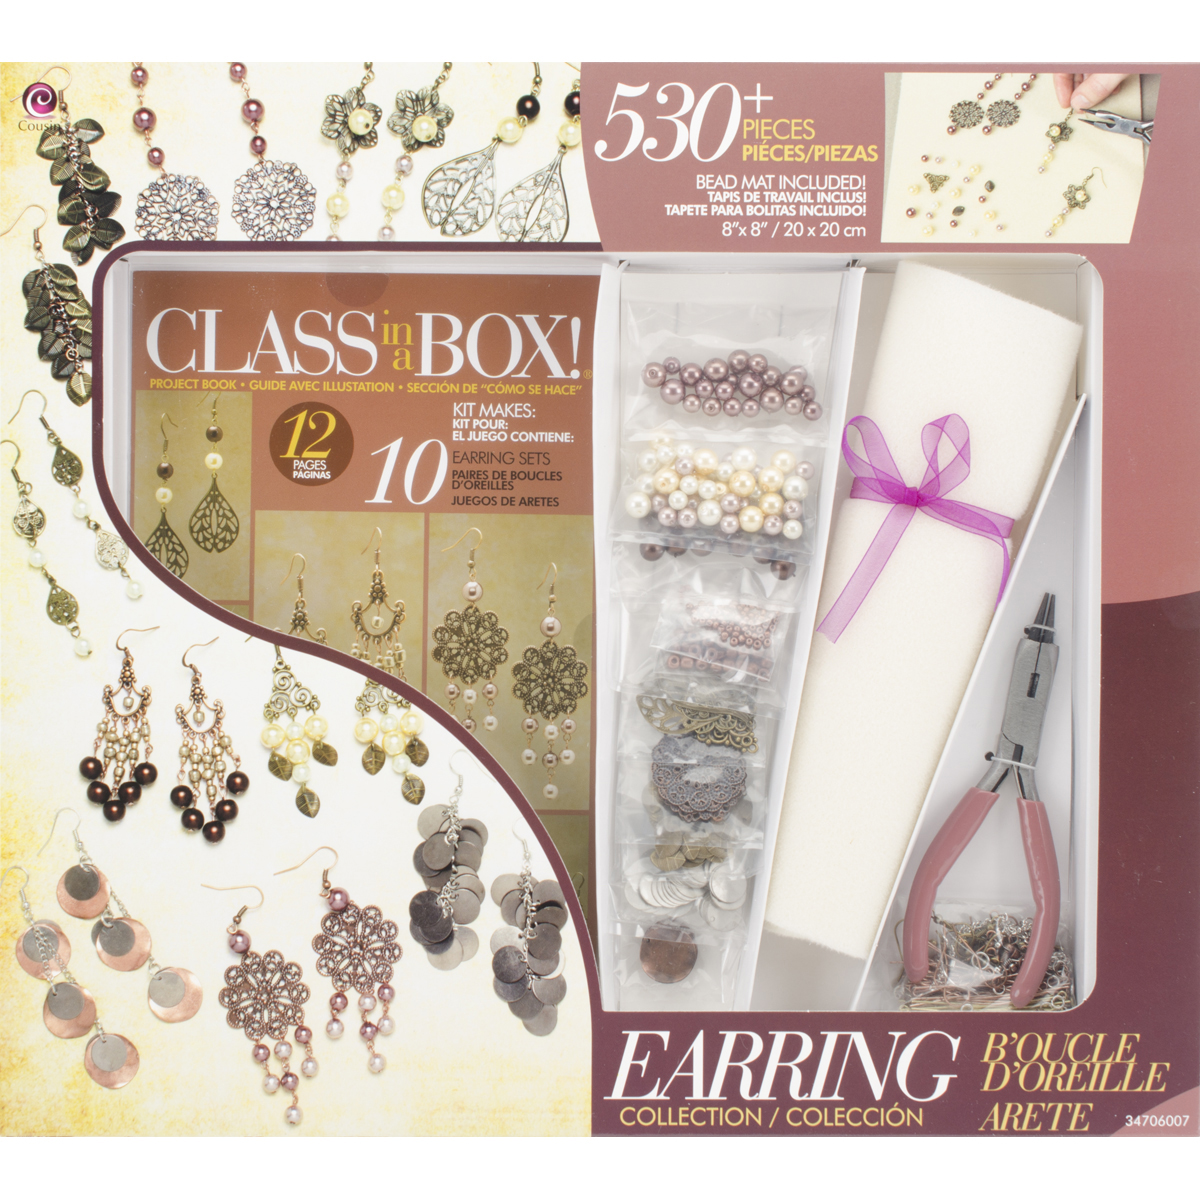 Cousin Jewelry Basics Class In A Box Kit-Gold & Copper Earrings - image 1 of 3